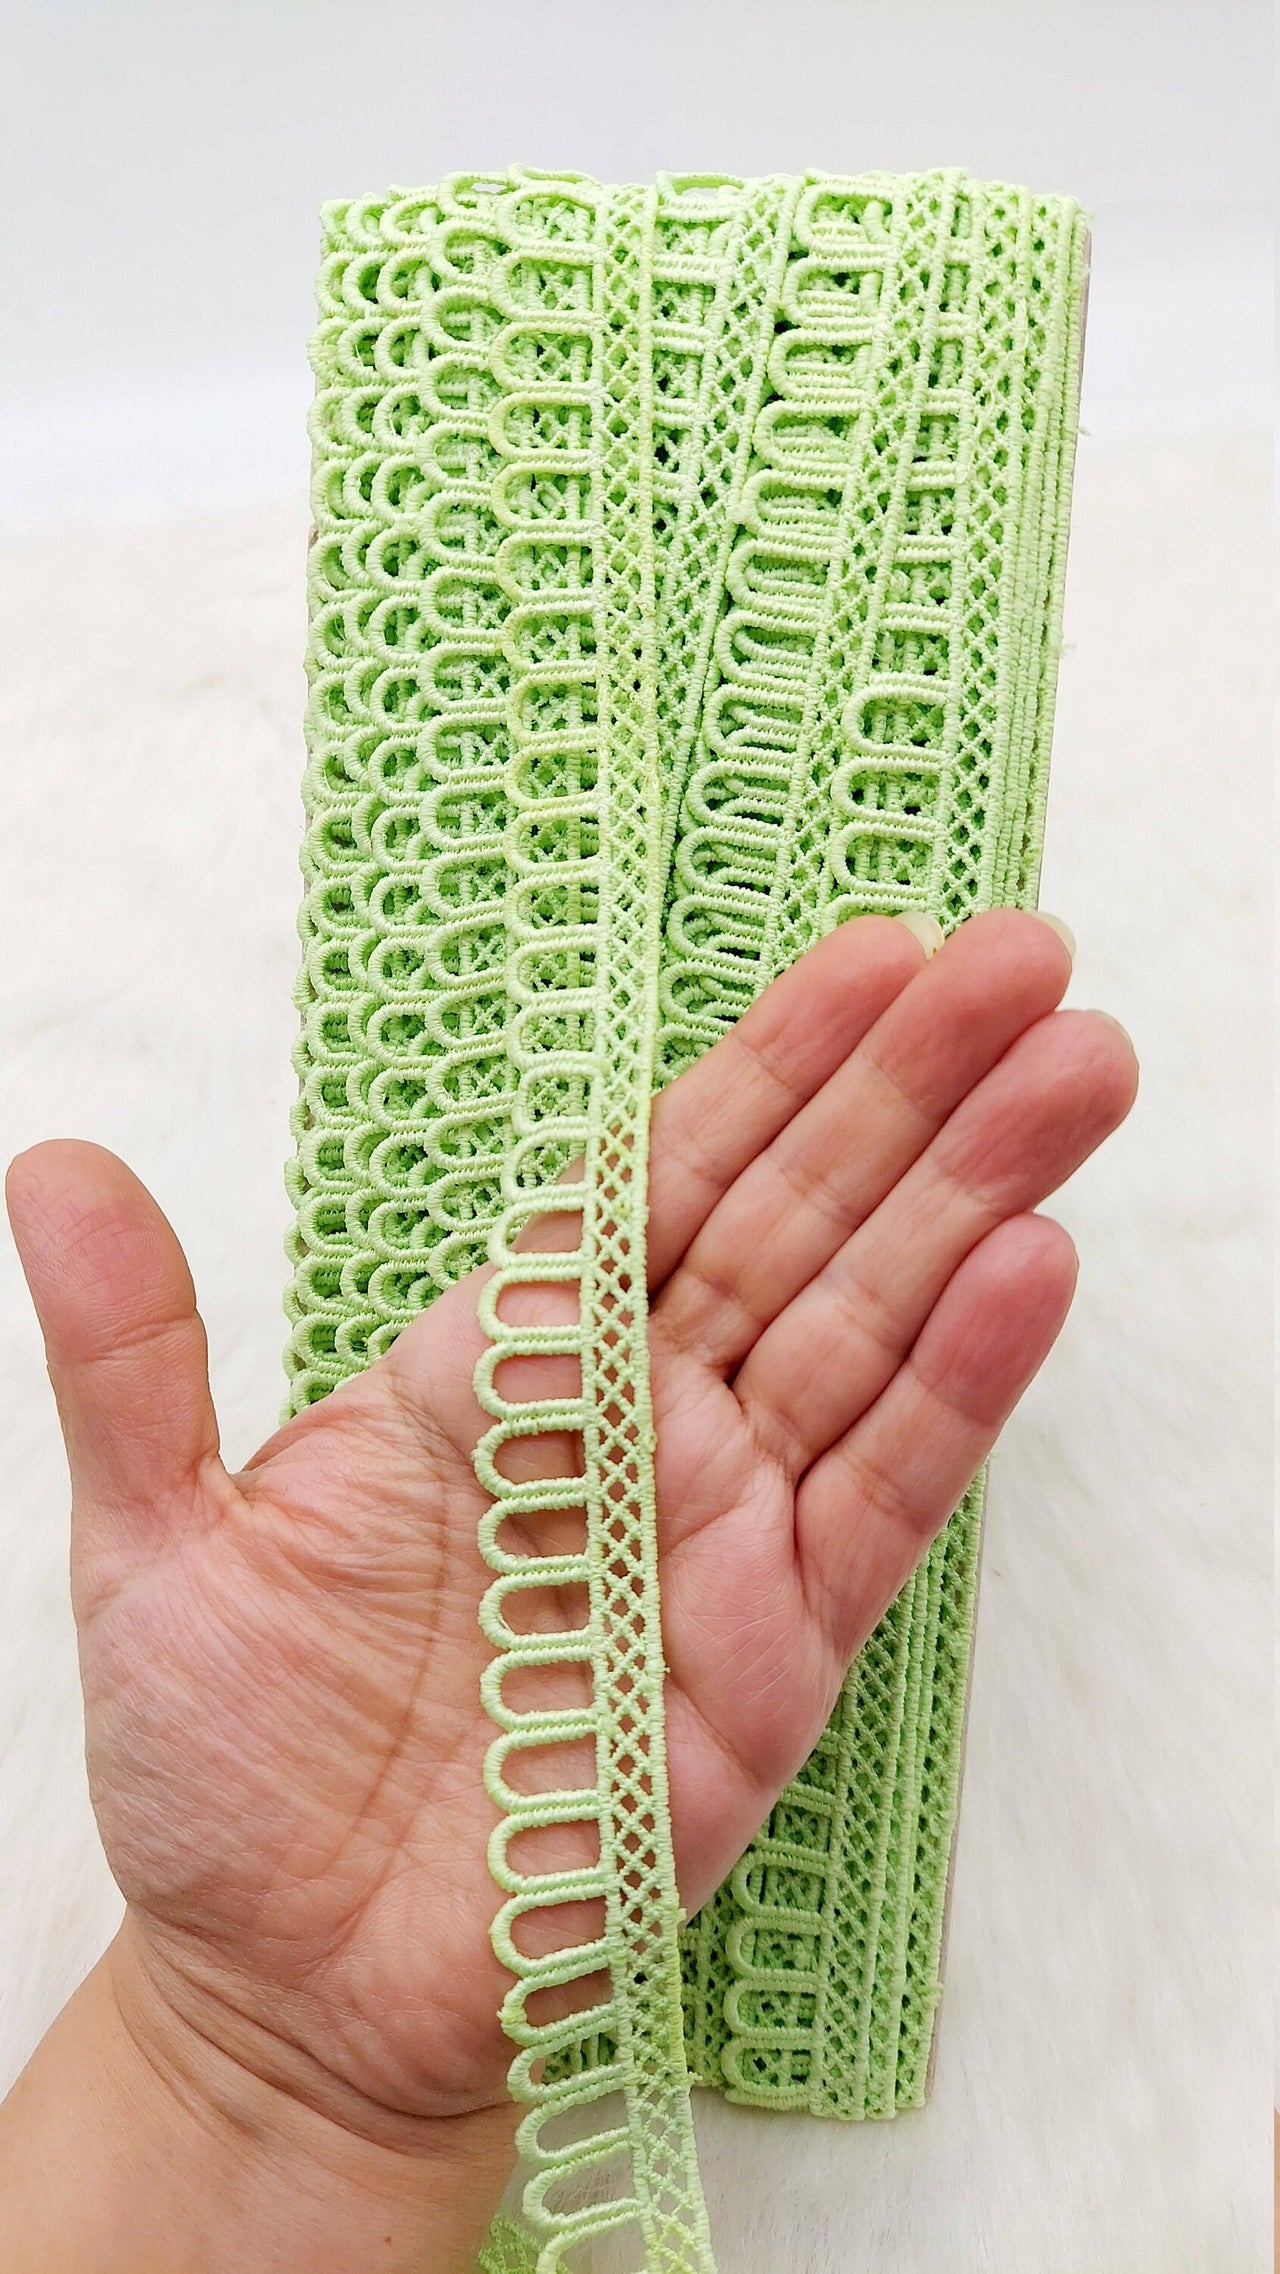 9 Yards Green Embroidery Cotton Lace Trim, Approx. 20mm Wide, Fringe Trim